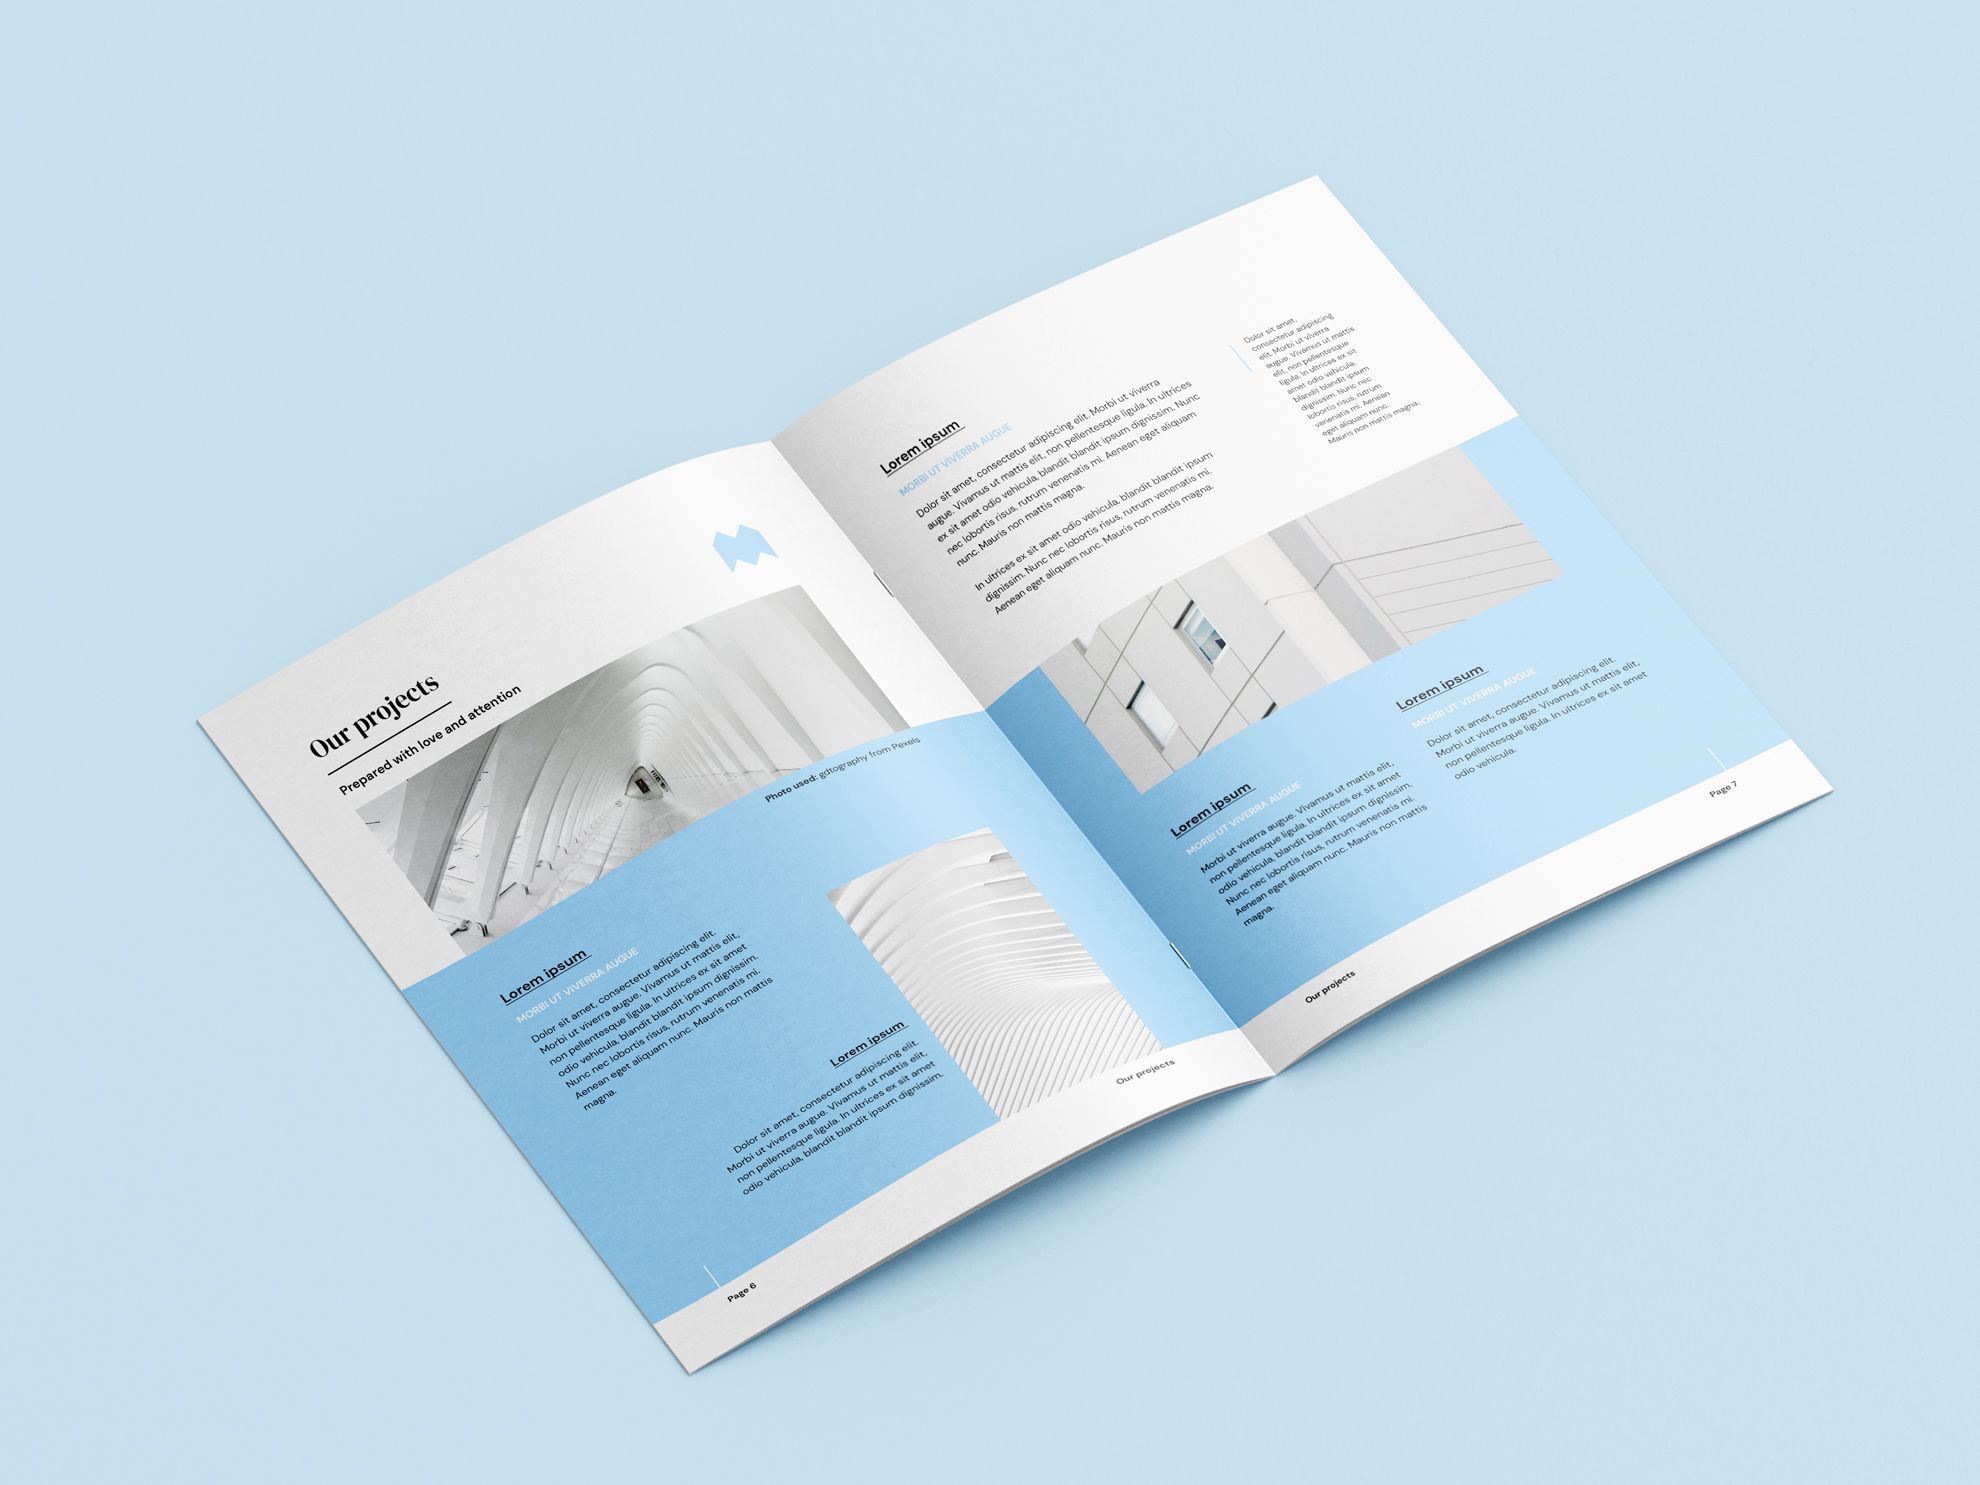 Print Pamphlets Online Custom UK: Are you looking for a print pamphlets? Entrust you to the online service of Sprint24: quality at small prices. Configure now your products!